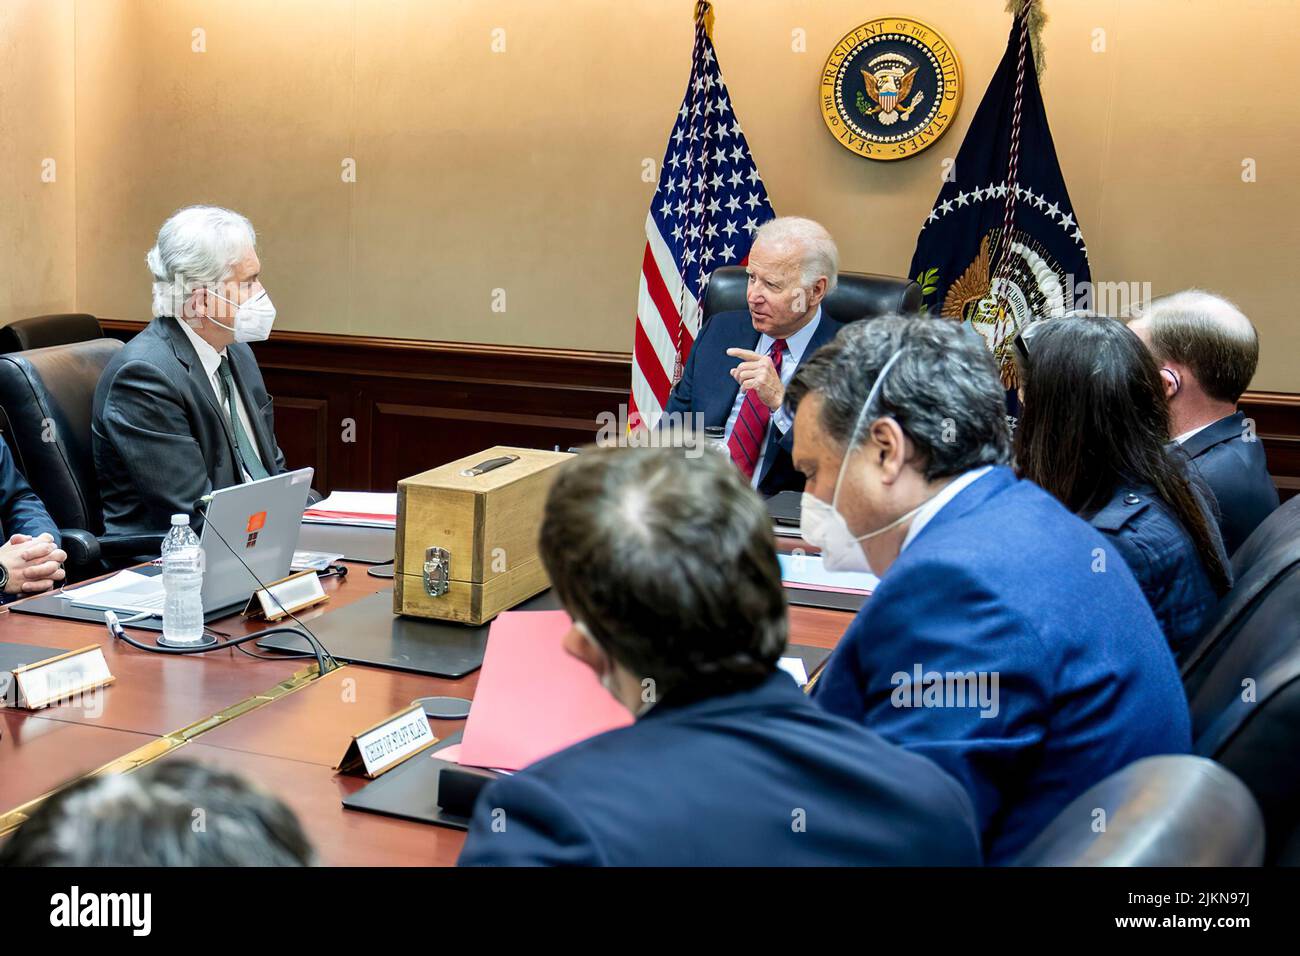 On July 1, 2022, President Biden meets with his national security team to discuss the counterterrorism operation to take out Ayman al-Zawahiri. At this meeting, the President was briefed on the proposed operation and shown (in the box on the table) a model of the safe house where Al-Zawahiri was hiding. Stock Photo